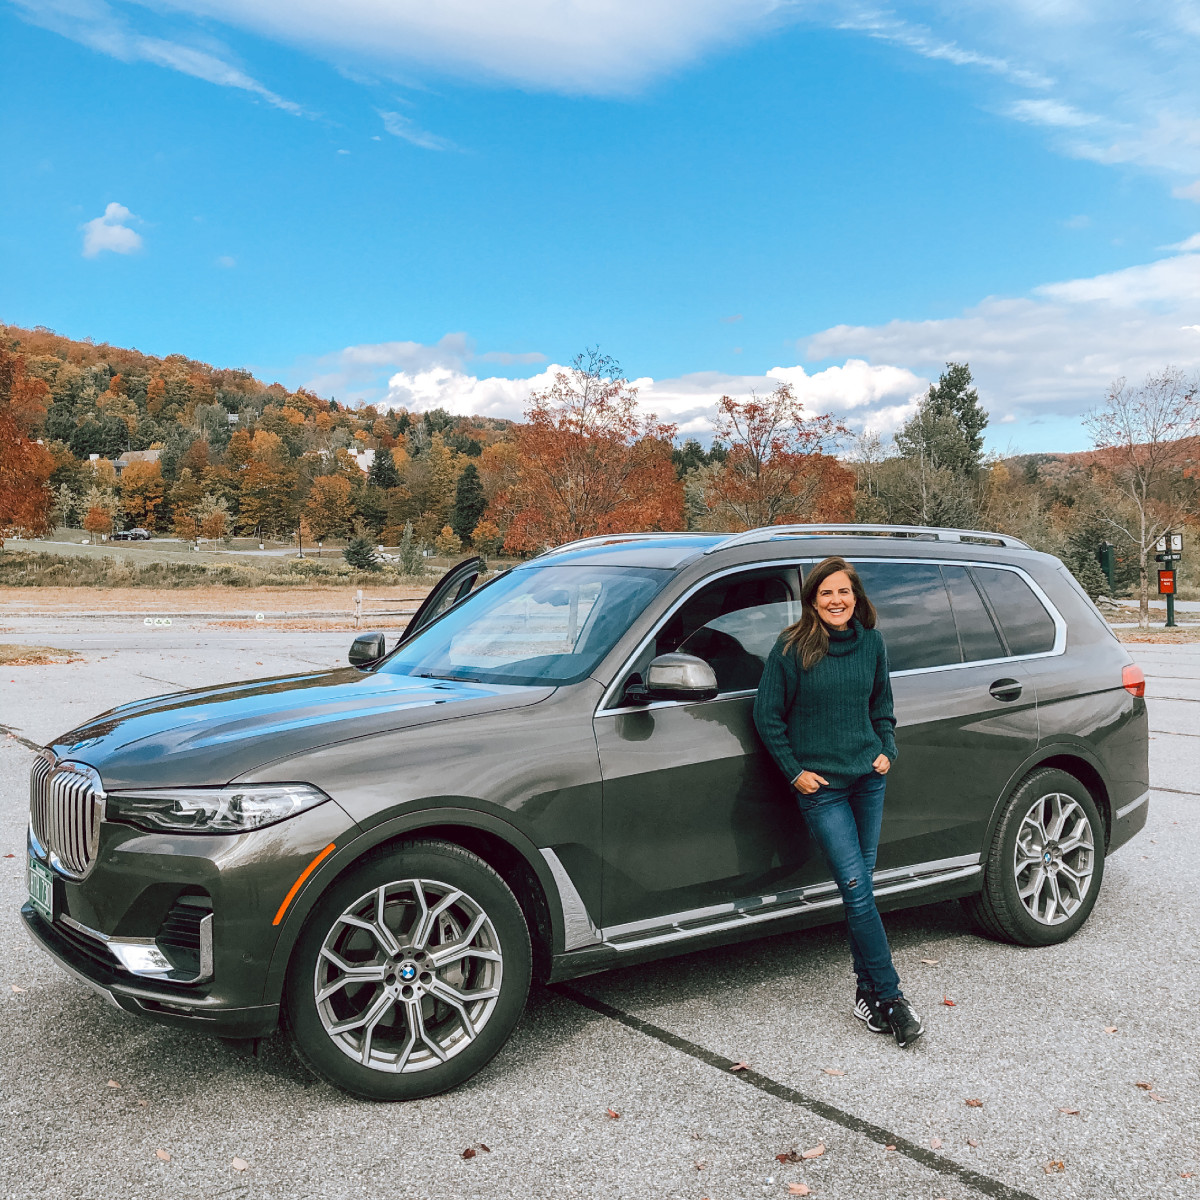 What You Need to Know About the BMW X7